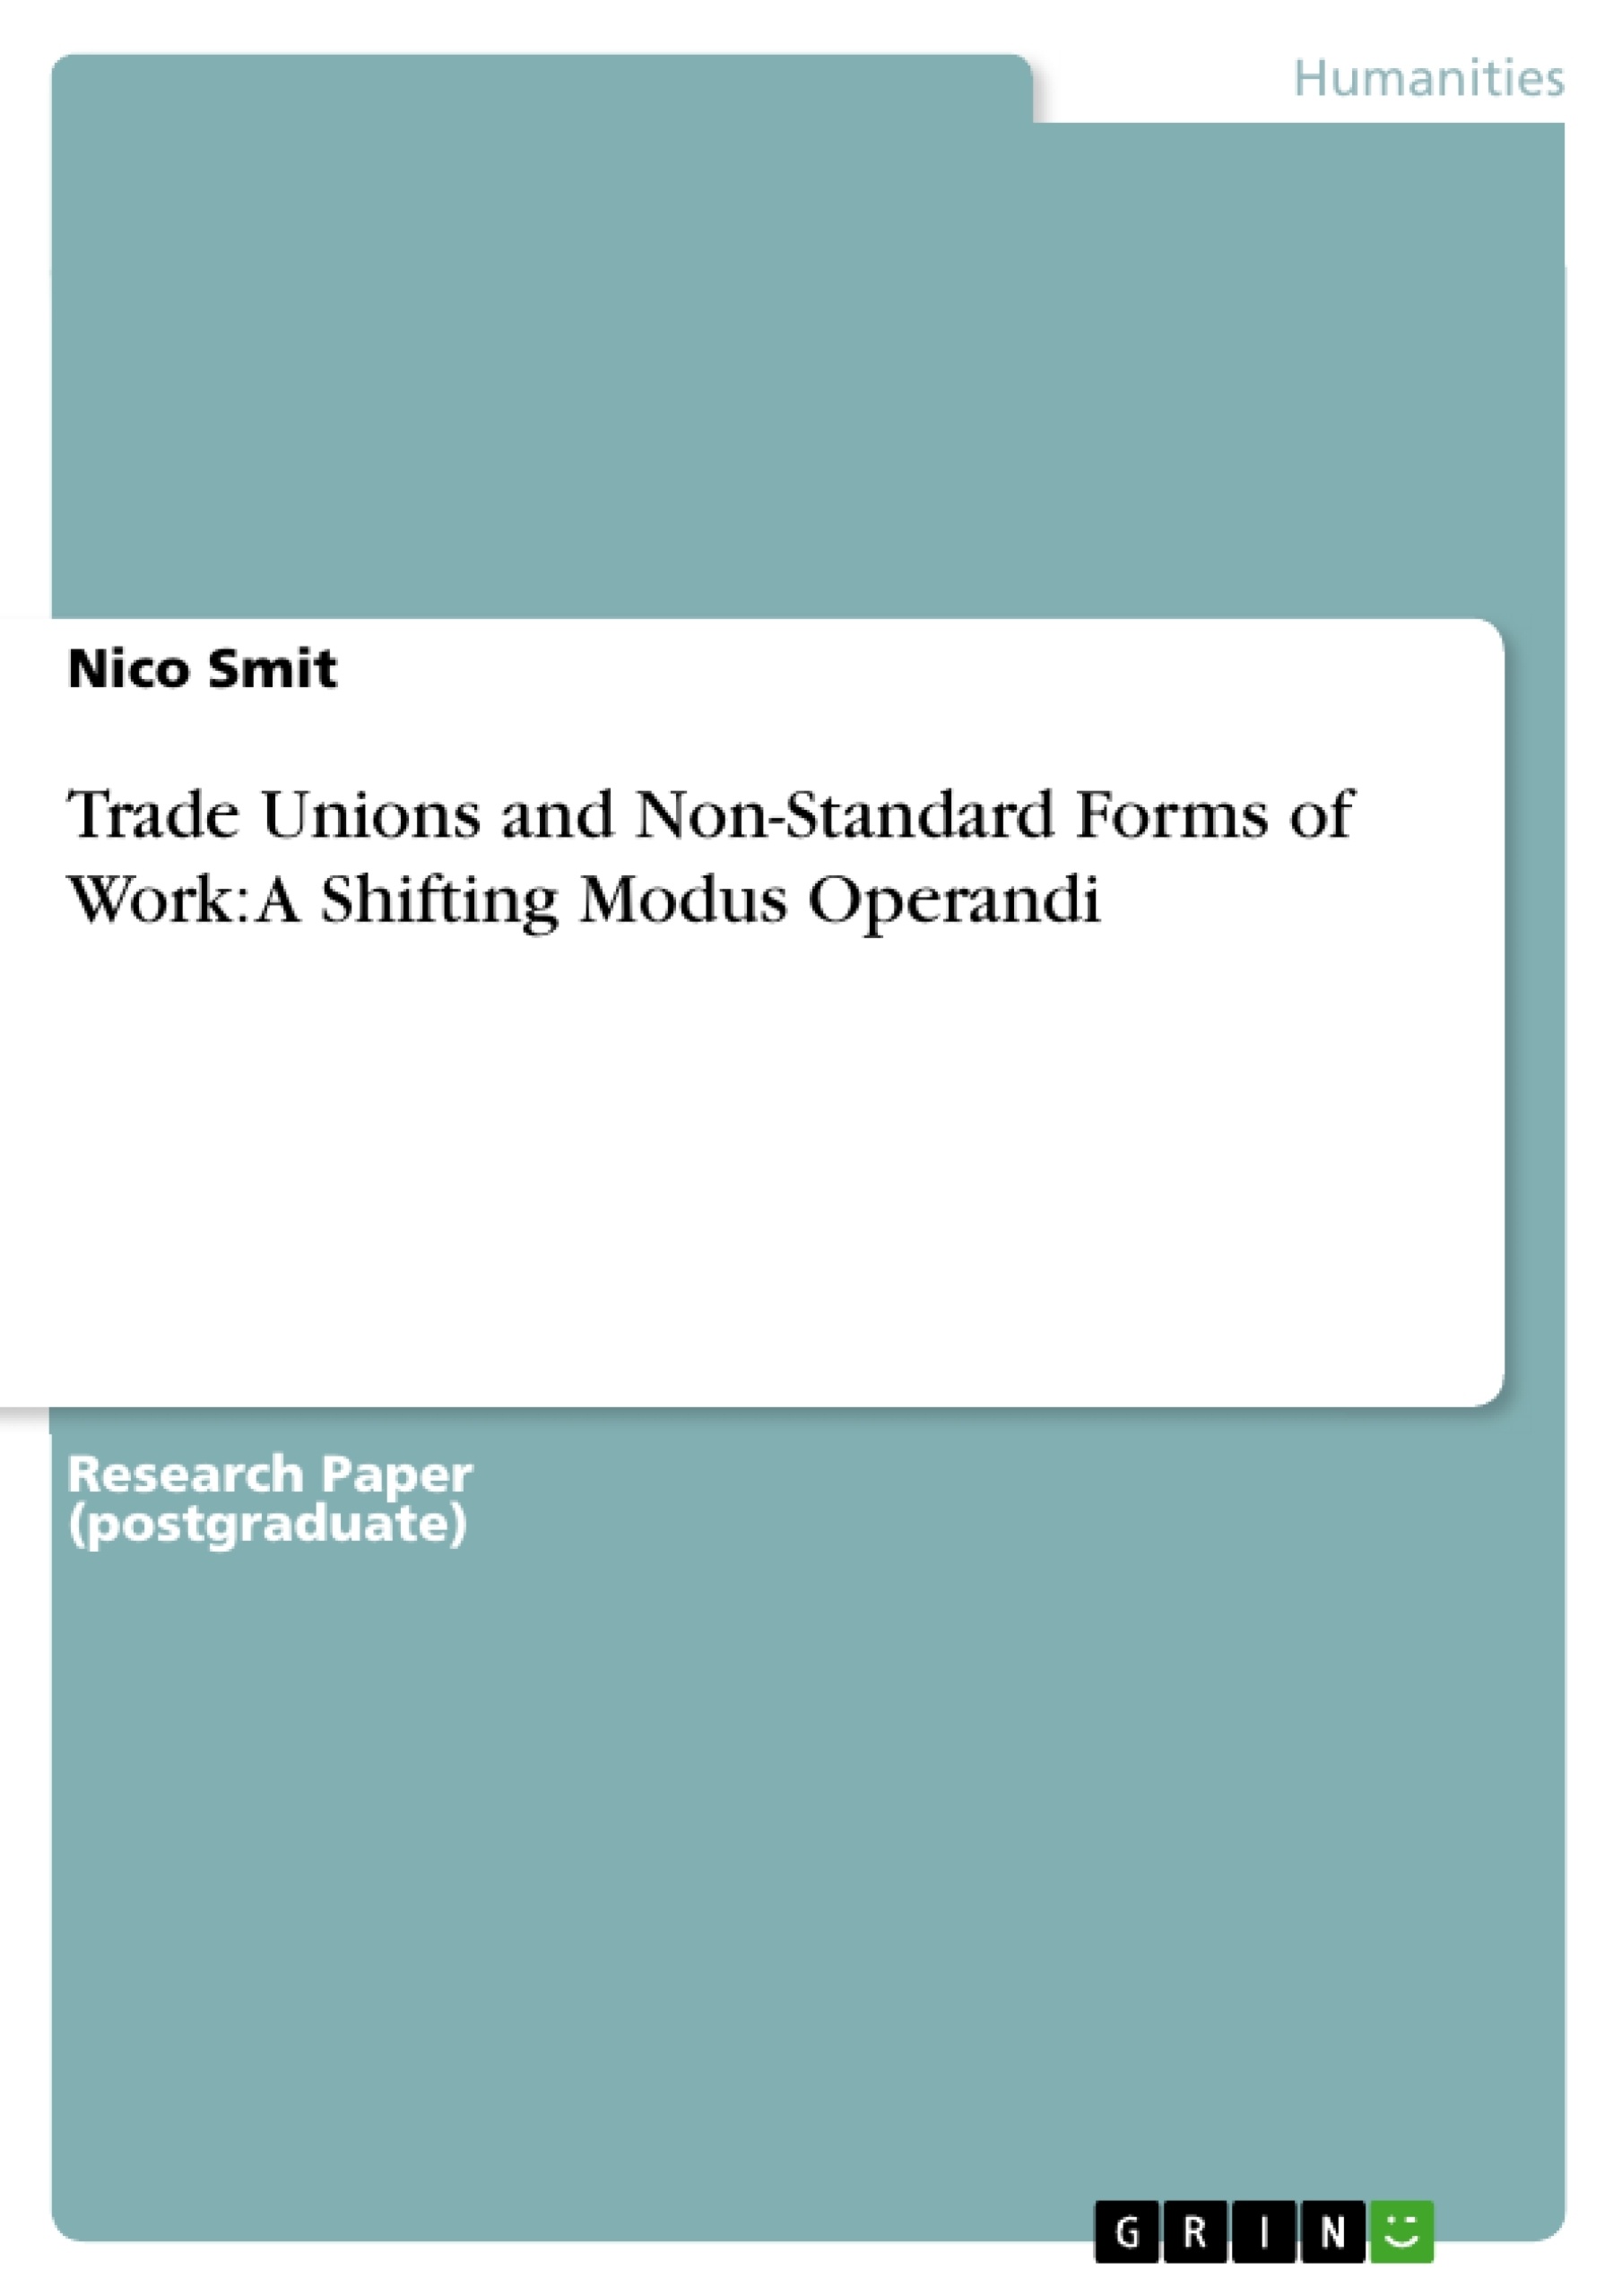 Titre: Trade Unions and Non-Standard Forms of Work: A Shifting Modus Operandi